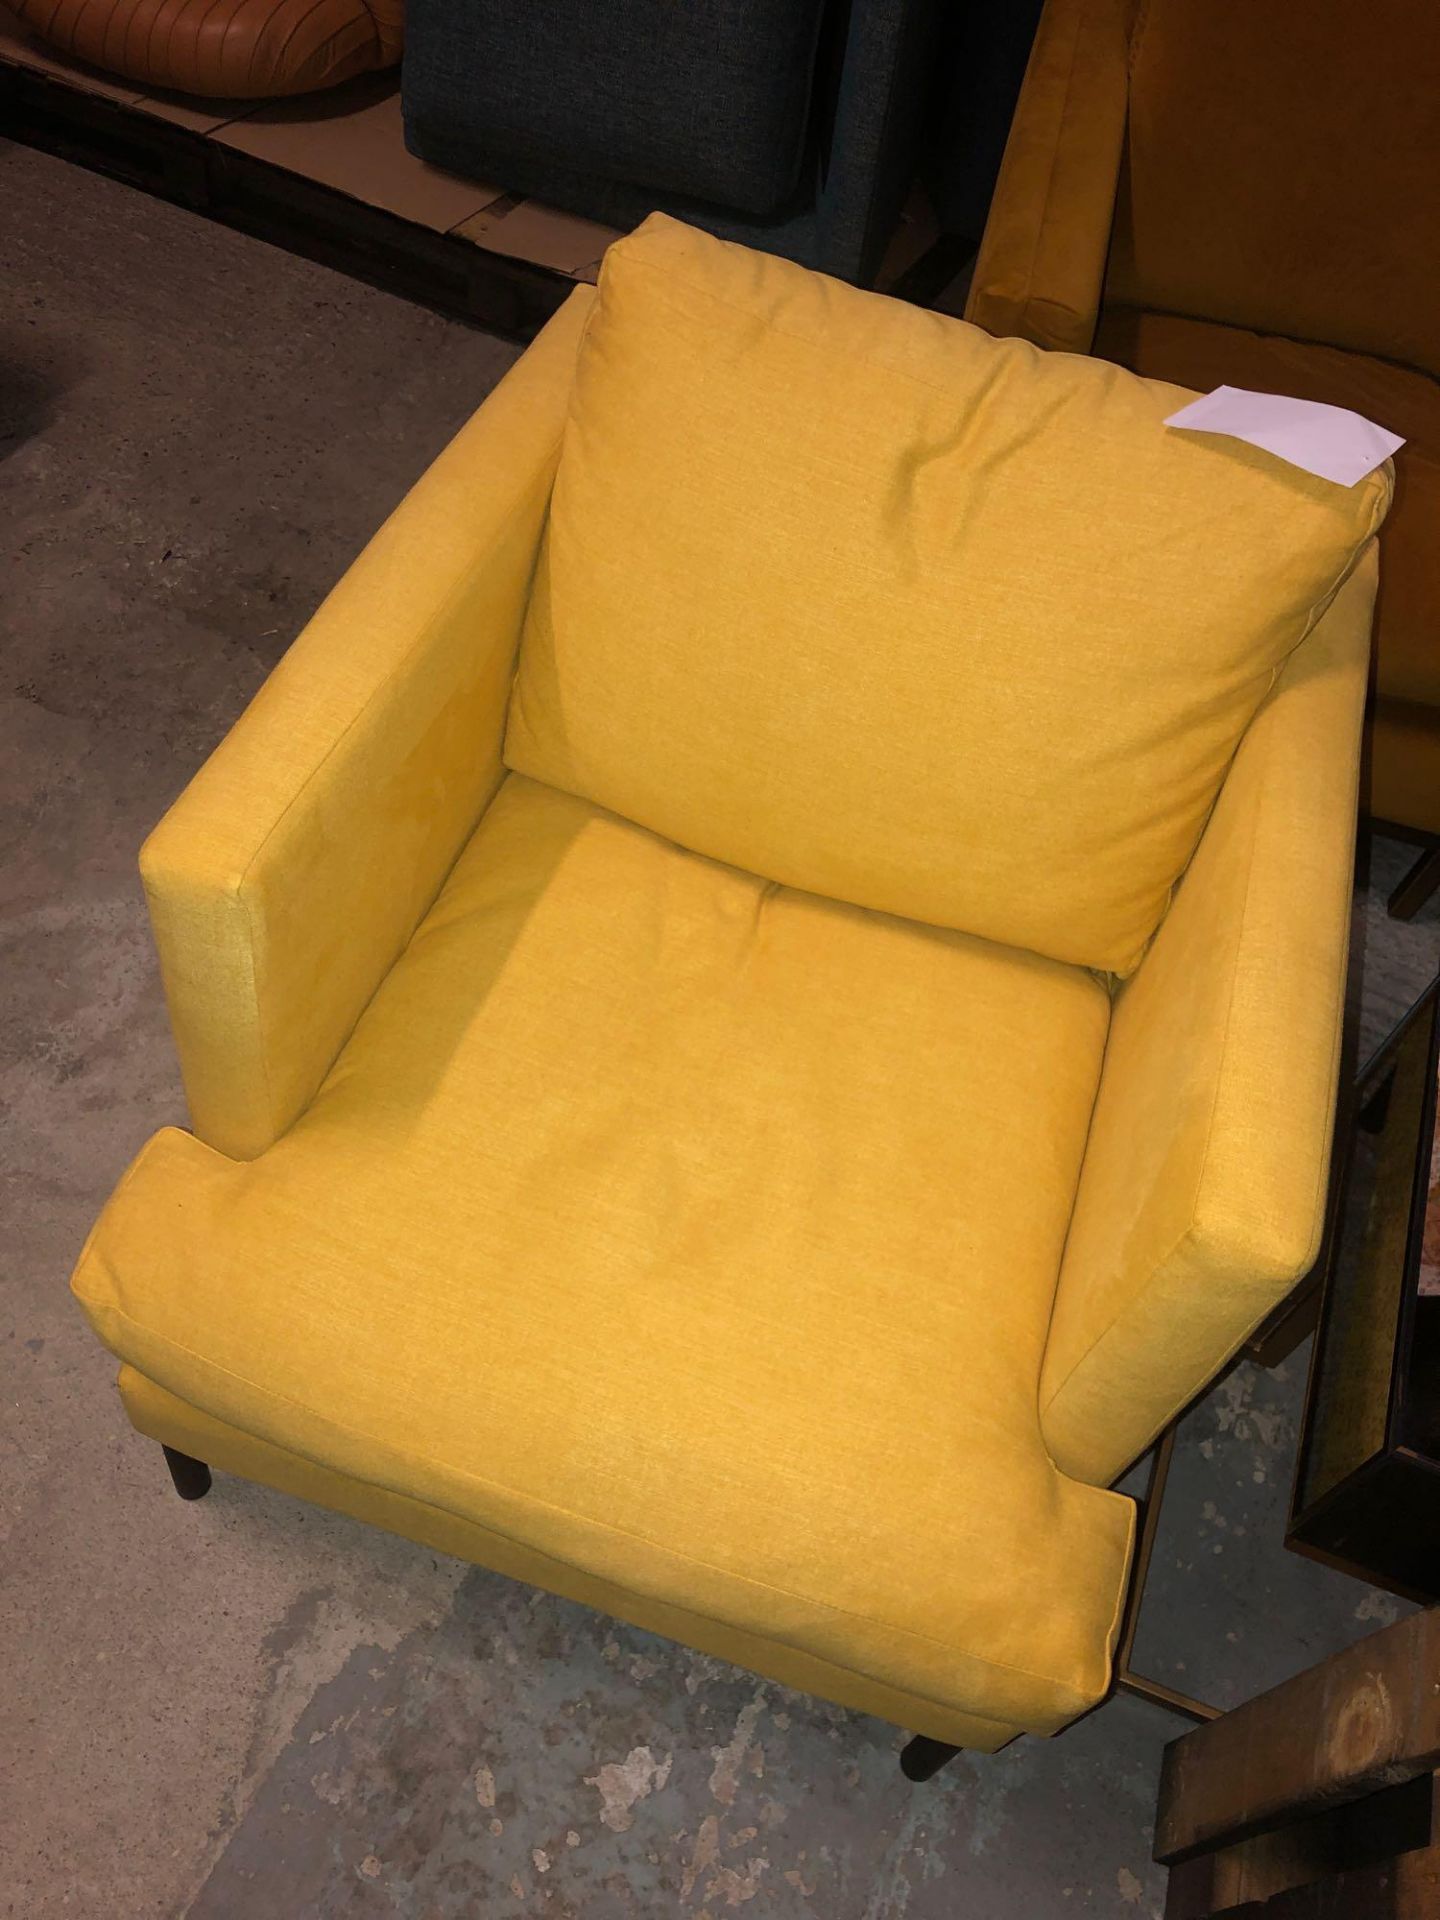 Dulwich Armchair Modena Ochre 800 x 1000 x 900 Complete The Apartment Living Look With Our Dulwich - Bild 3 aus 3